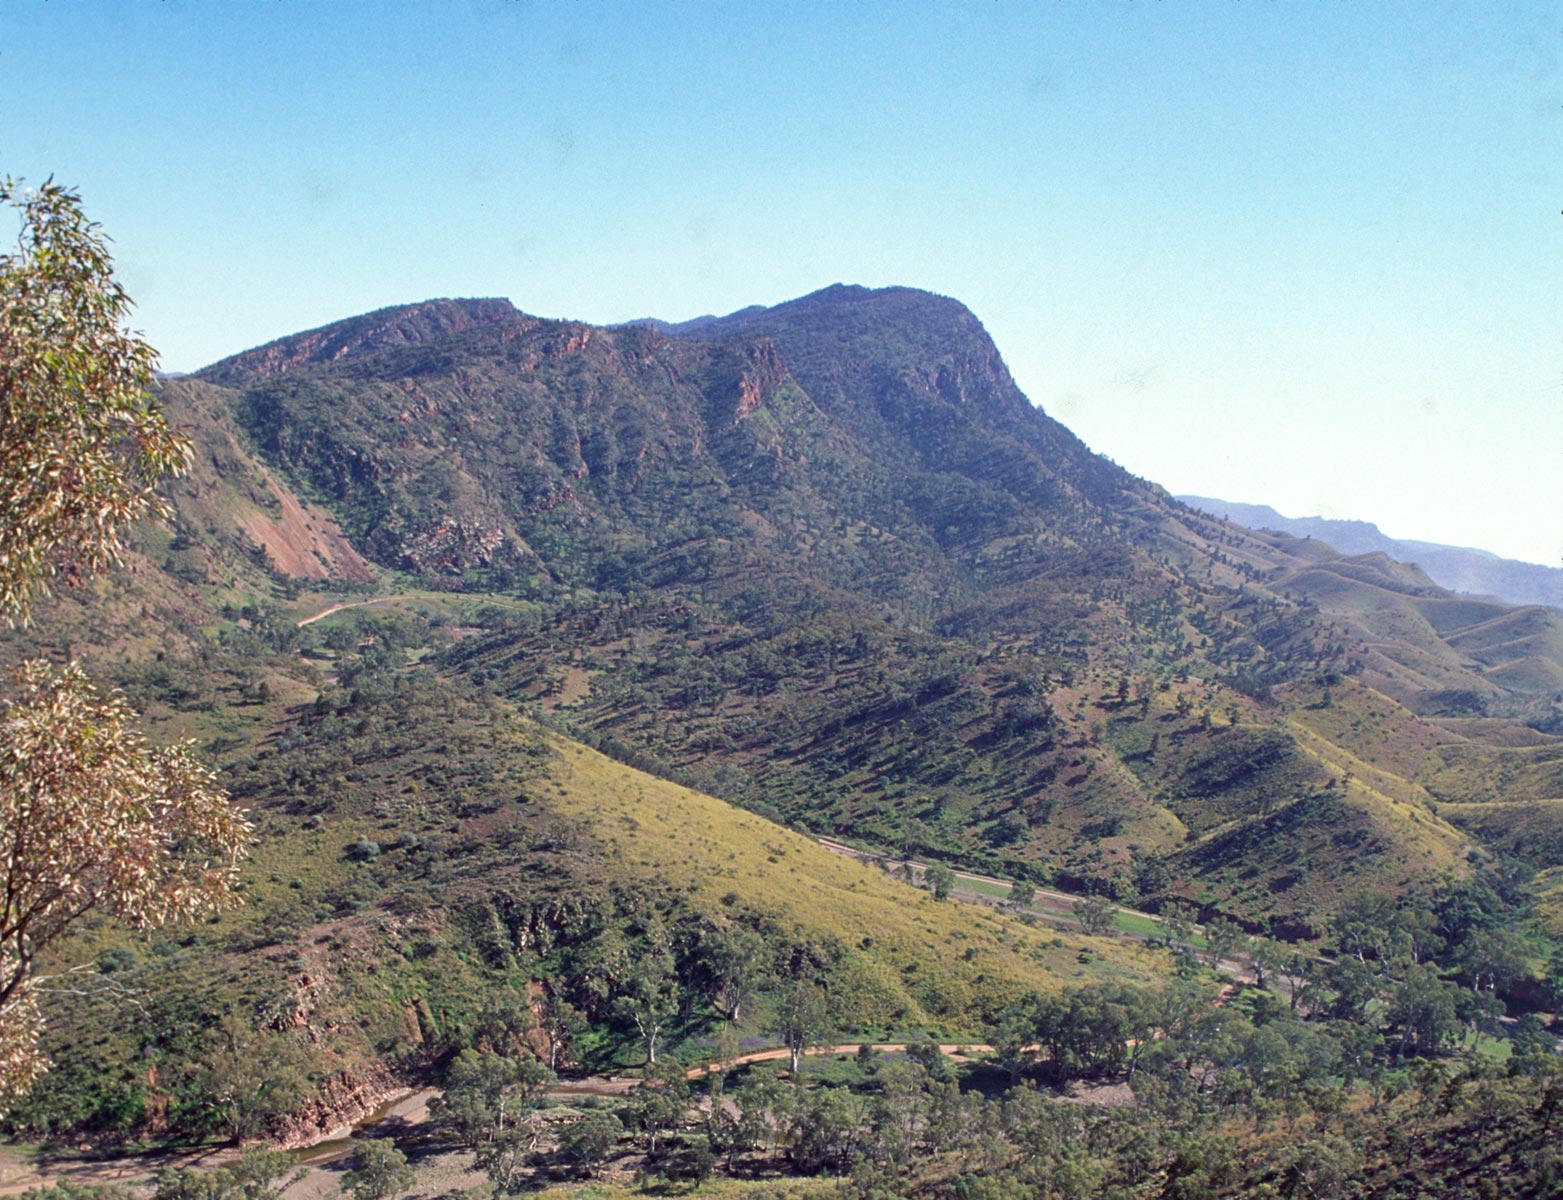 View overlooking Brachina Gorge towards the 'Armchair'